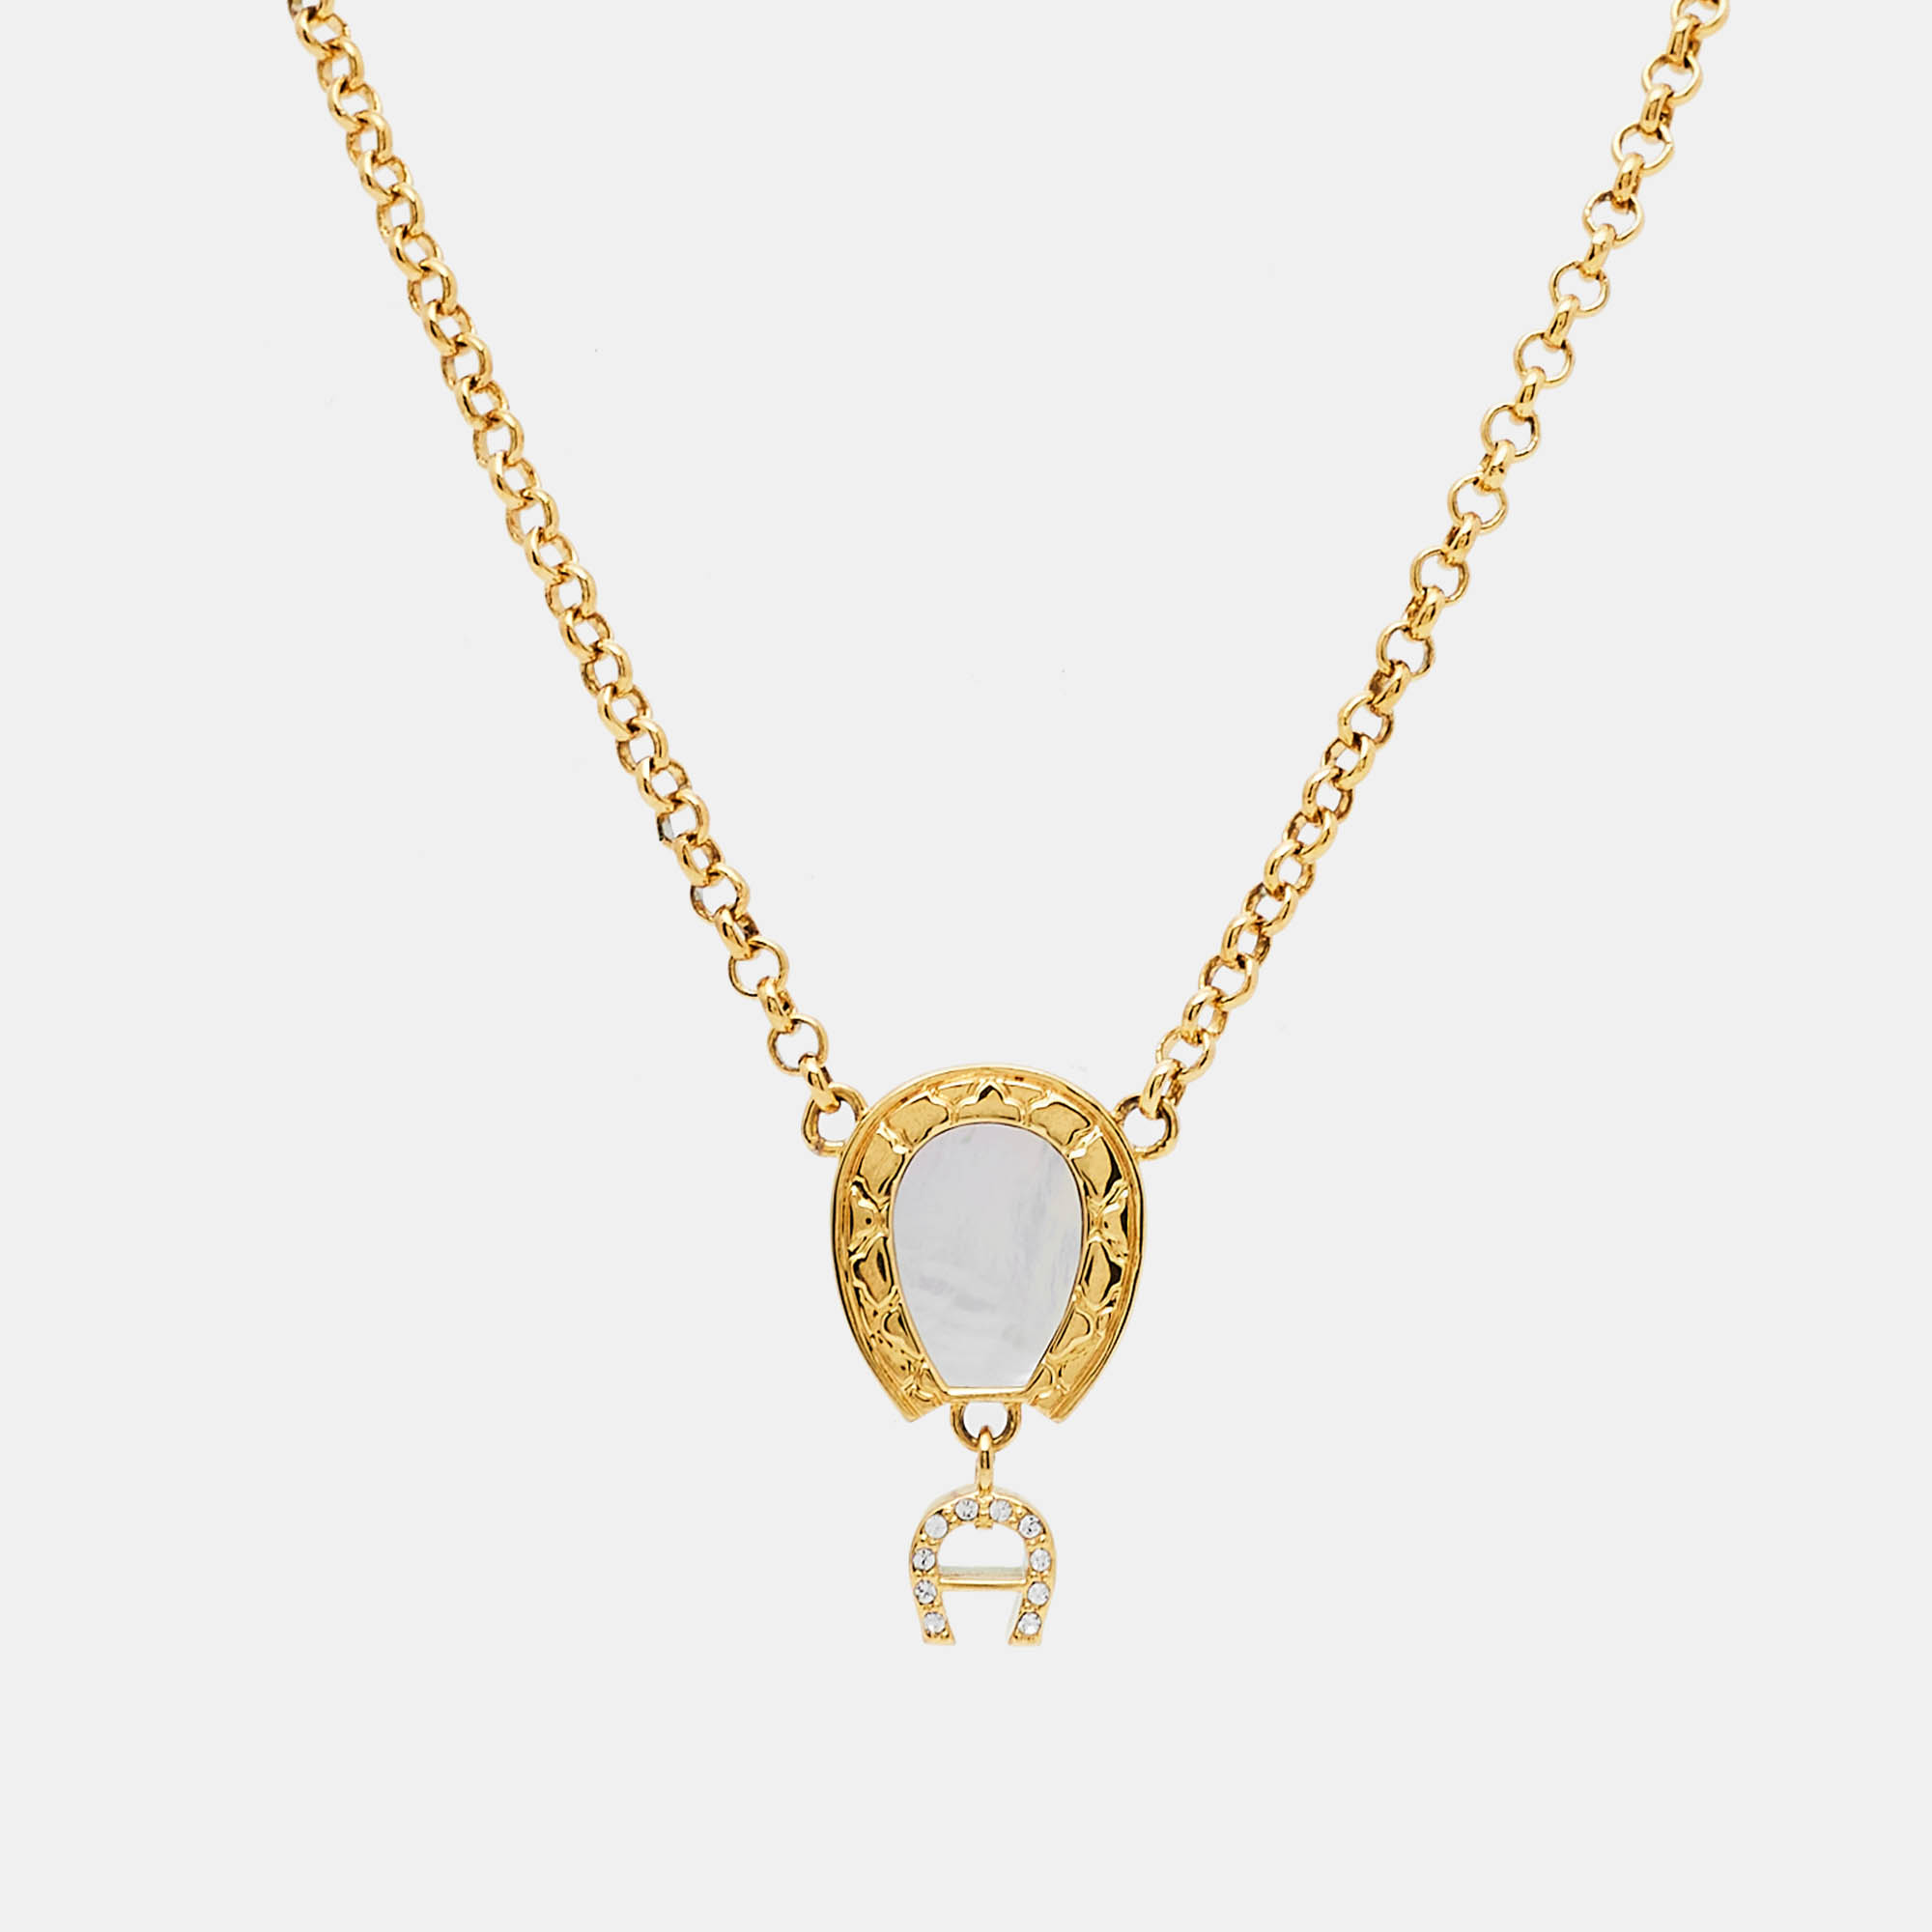 Aigner gold tone mother of pearl crystal logo pendant necklace